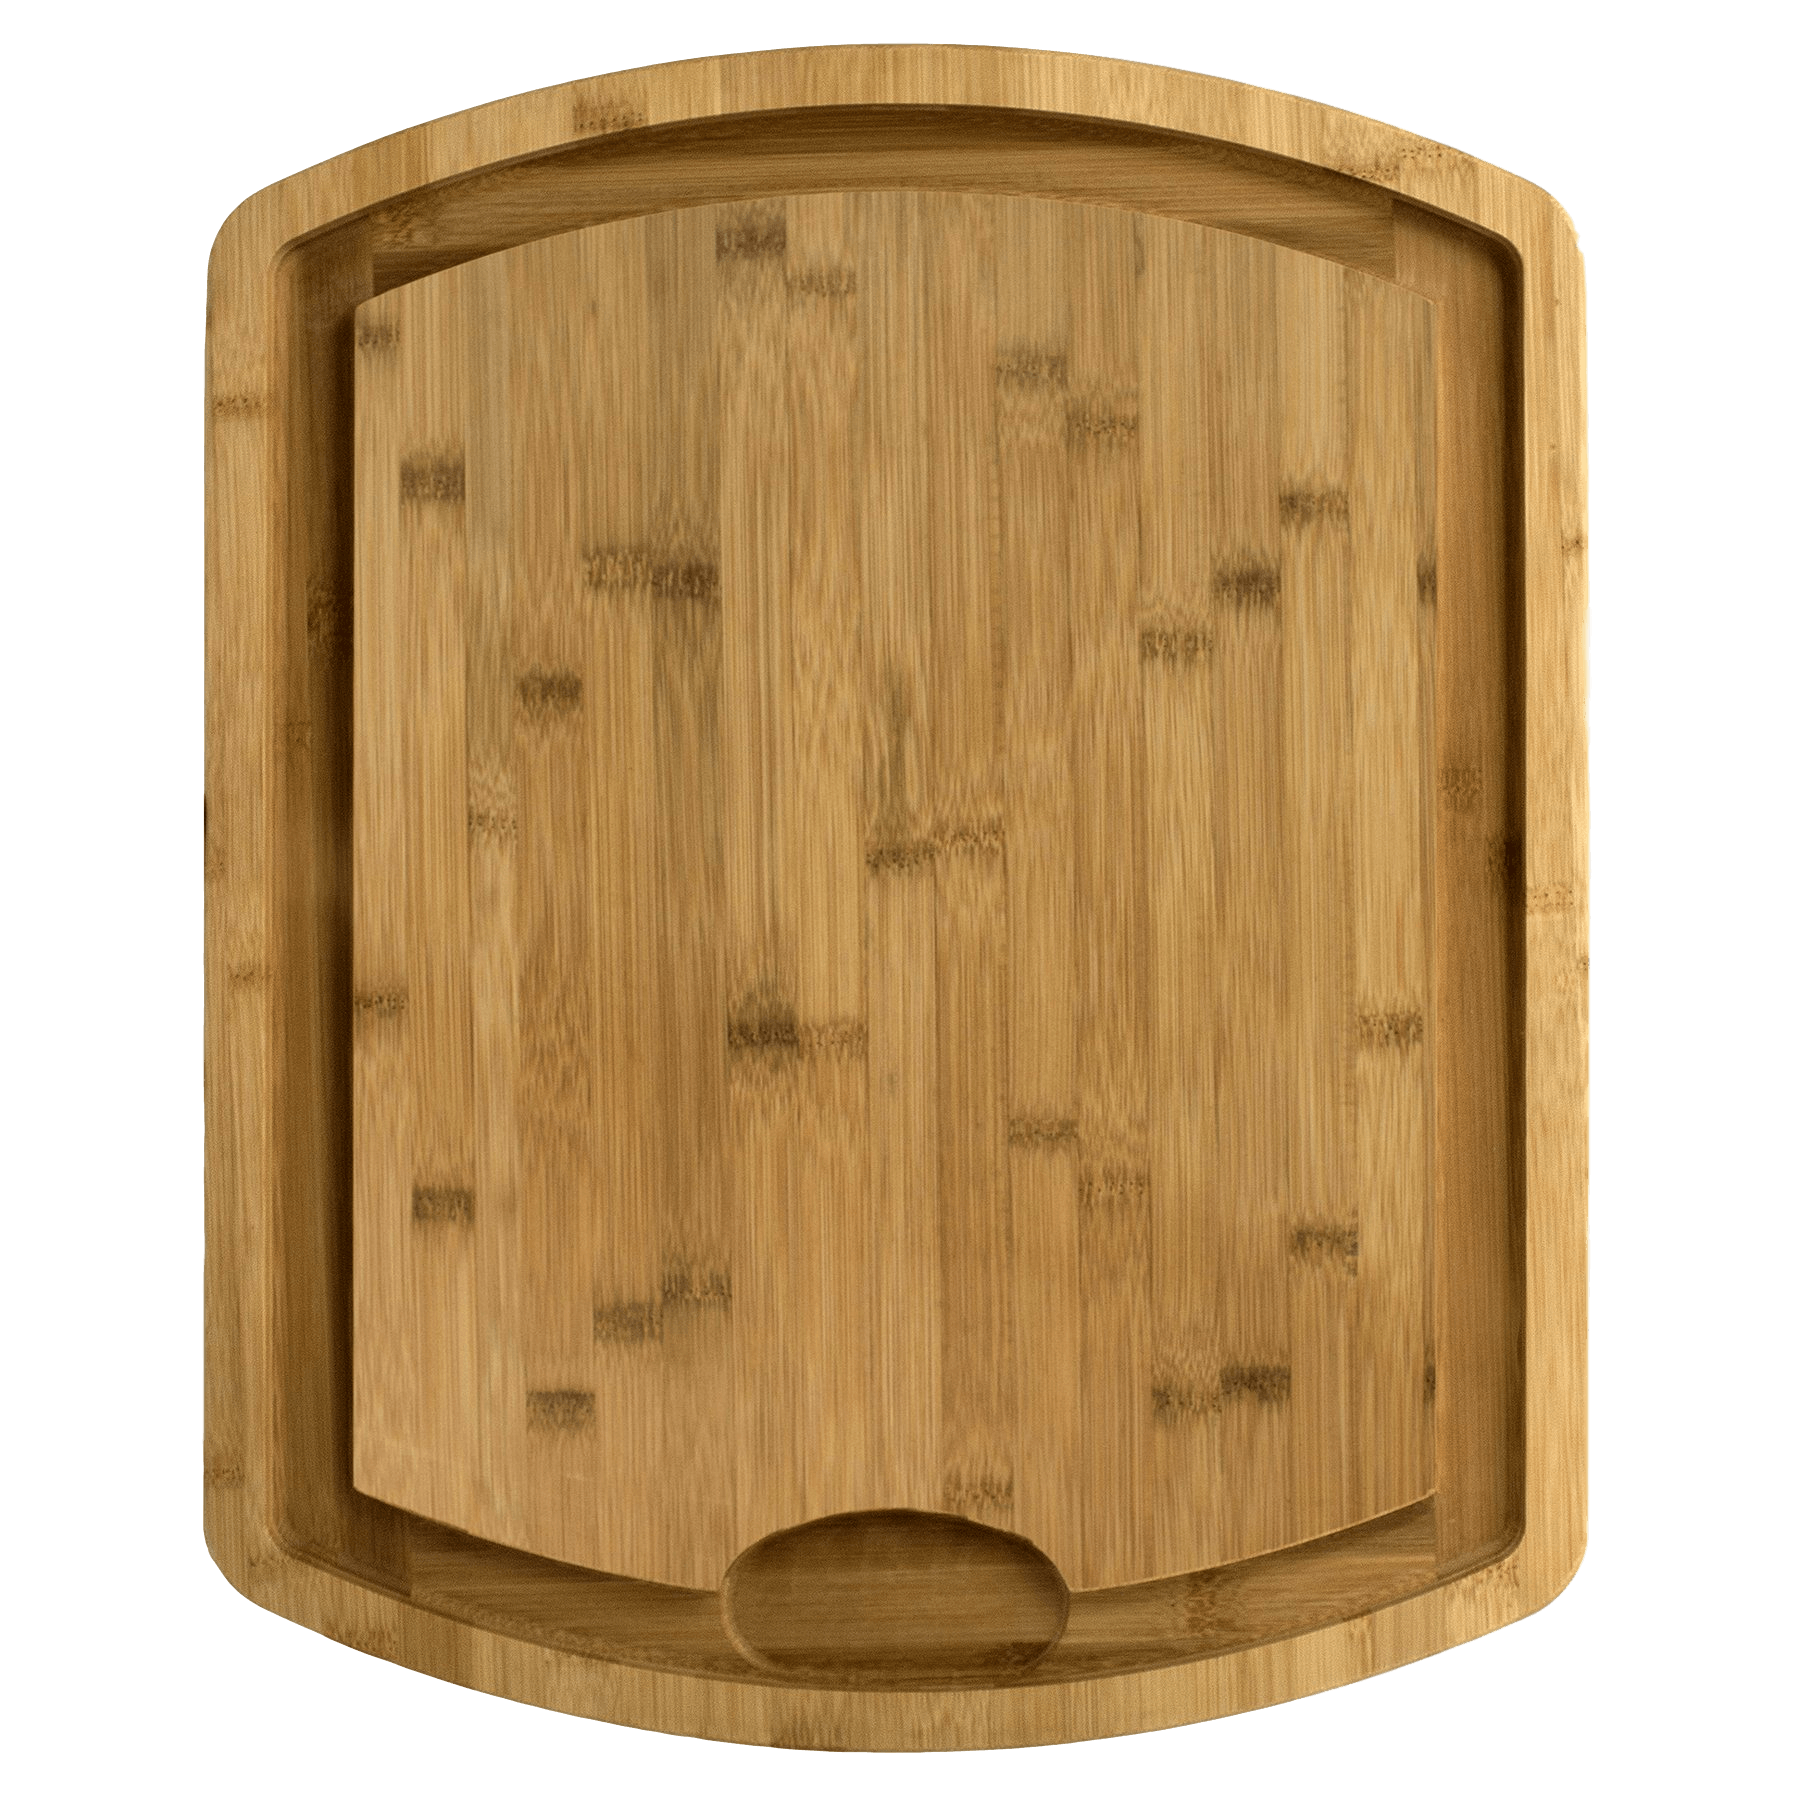 Laser Pics and Gifts: Farmhouse Carver Serving and Cutting Boards - Laser Pics & Gifts